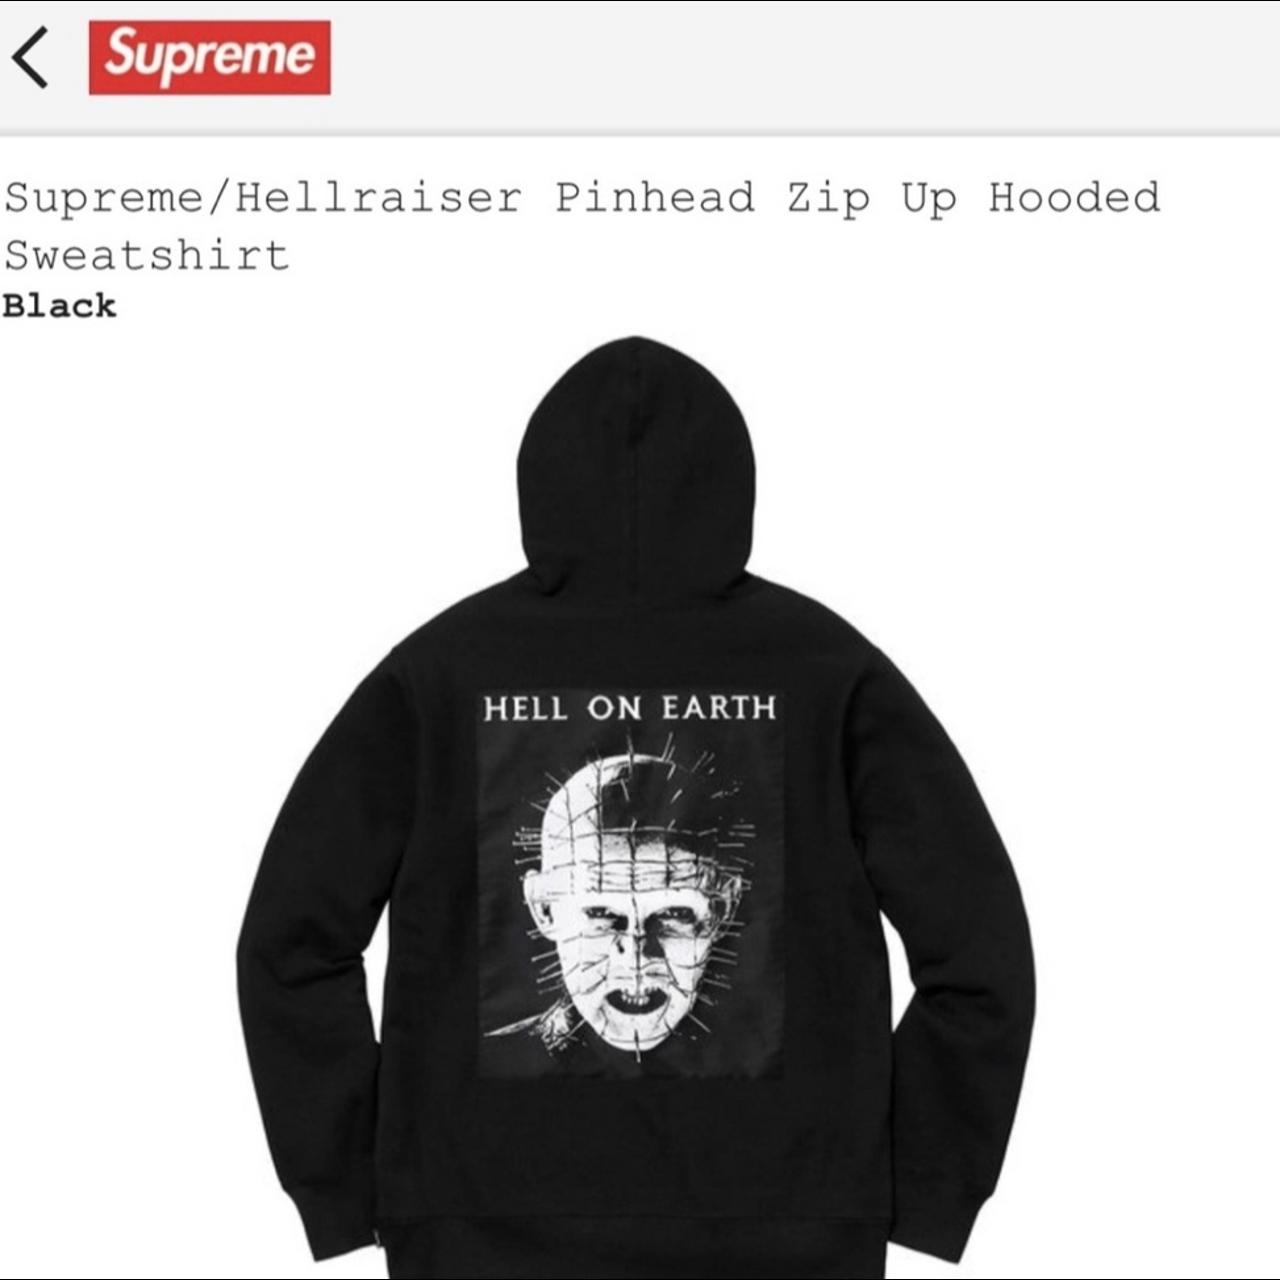 Authentic supreme hell on earth zip up hoodie. I’ve...